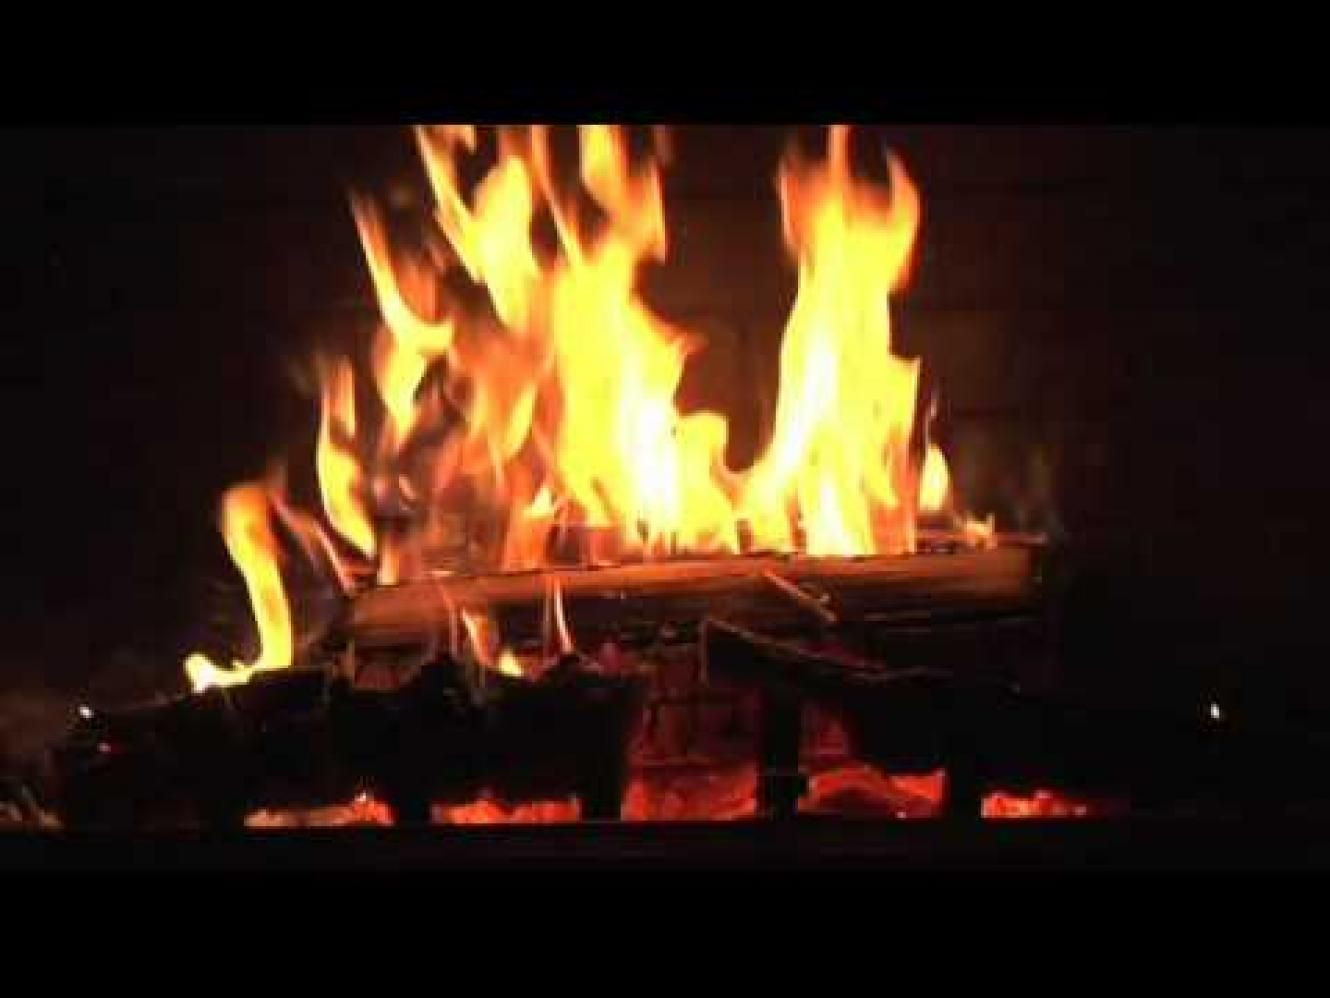 Christmas Music With Crackling Fireplace
 crackling fire screensaver